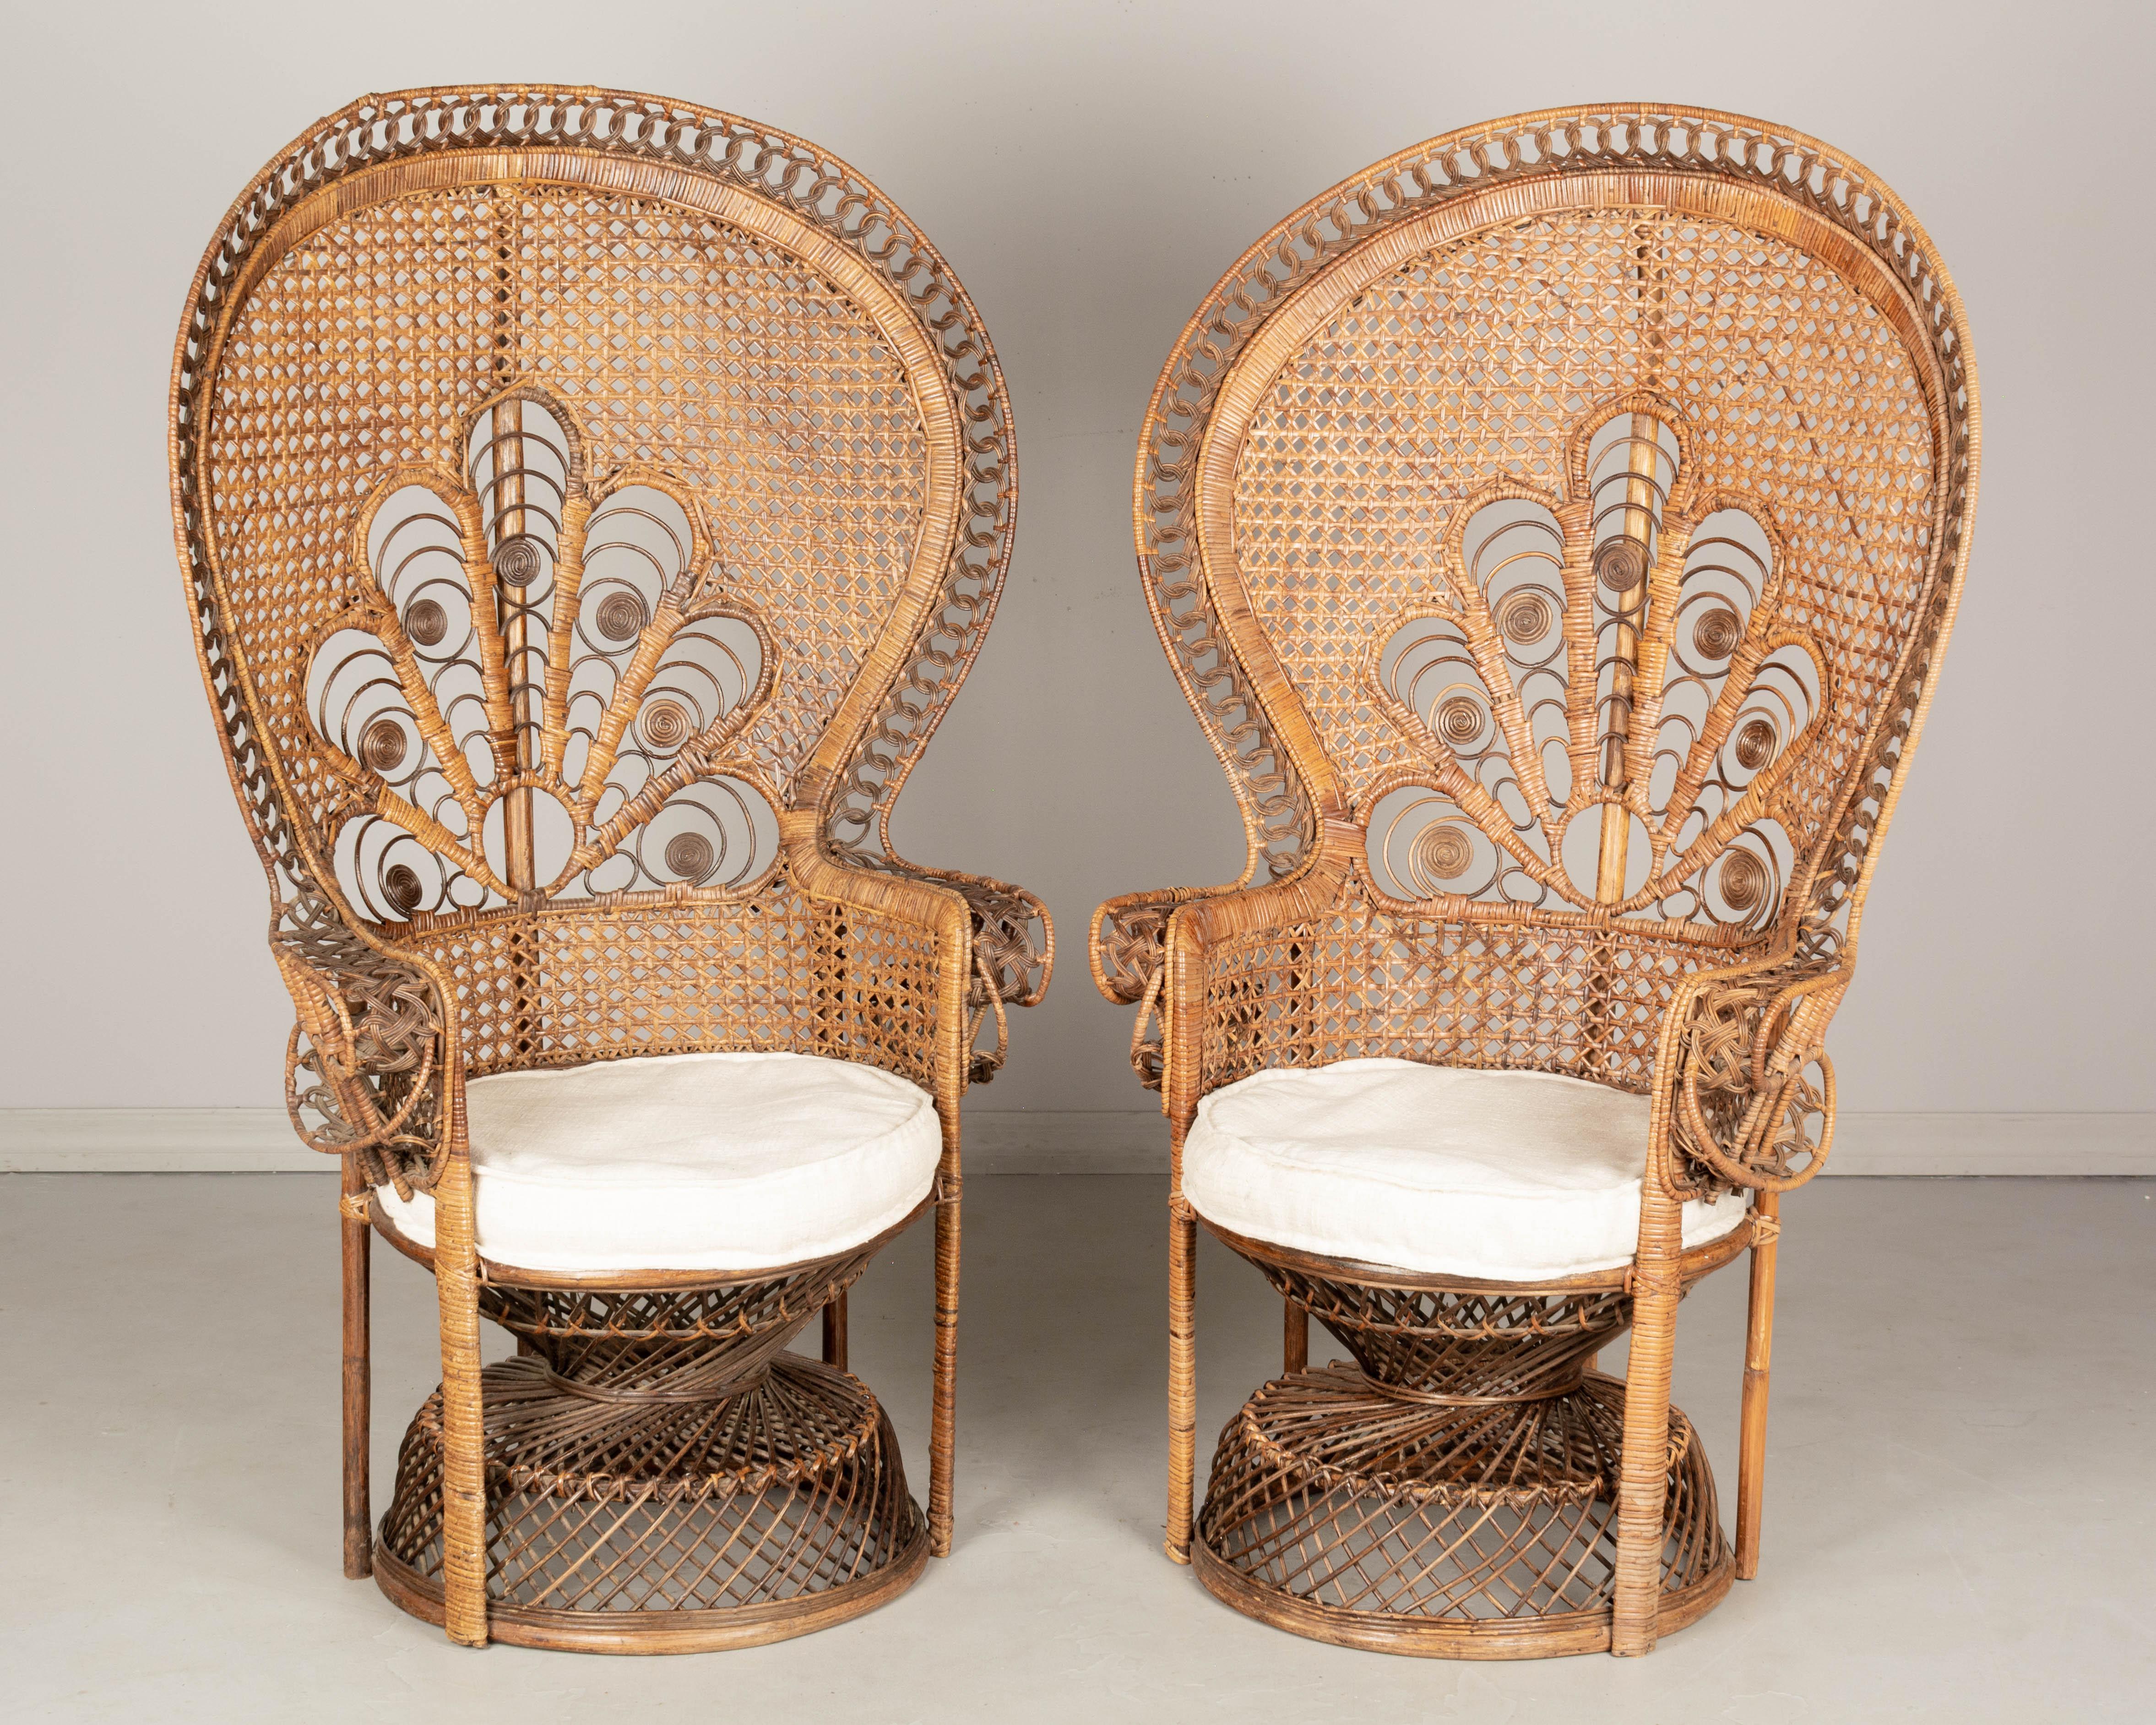 A pair of vintage French peacock armchairs with full fan back, made of handwoven rattan and produced by the French company Kok Maison in the 1970s. Stunning boho chic statement piece, beautifully crafted with intricate detailing, especially in the